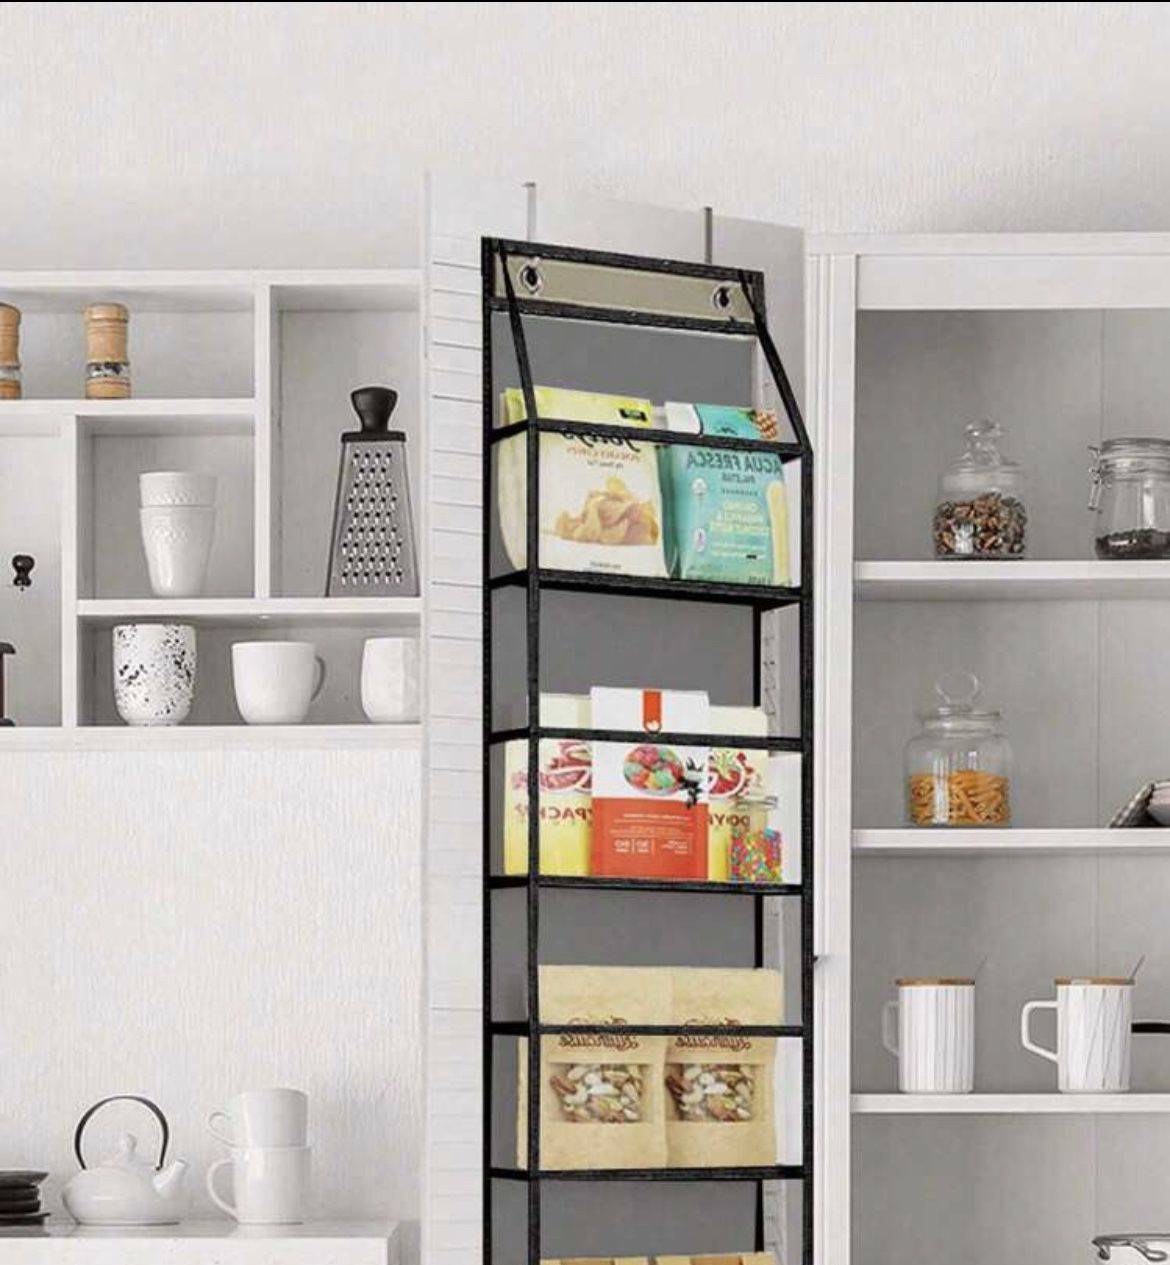 Preorder 1pc 130cm 4-Compartment Foldable Hanging Bag For Snacks, Toys, Clothes Storage, Grey, W/2 Hooks For Wall/Cabinet/Door Hanging In Kitchen/Bath